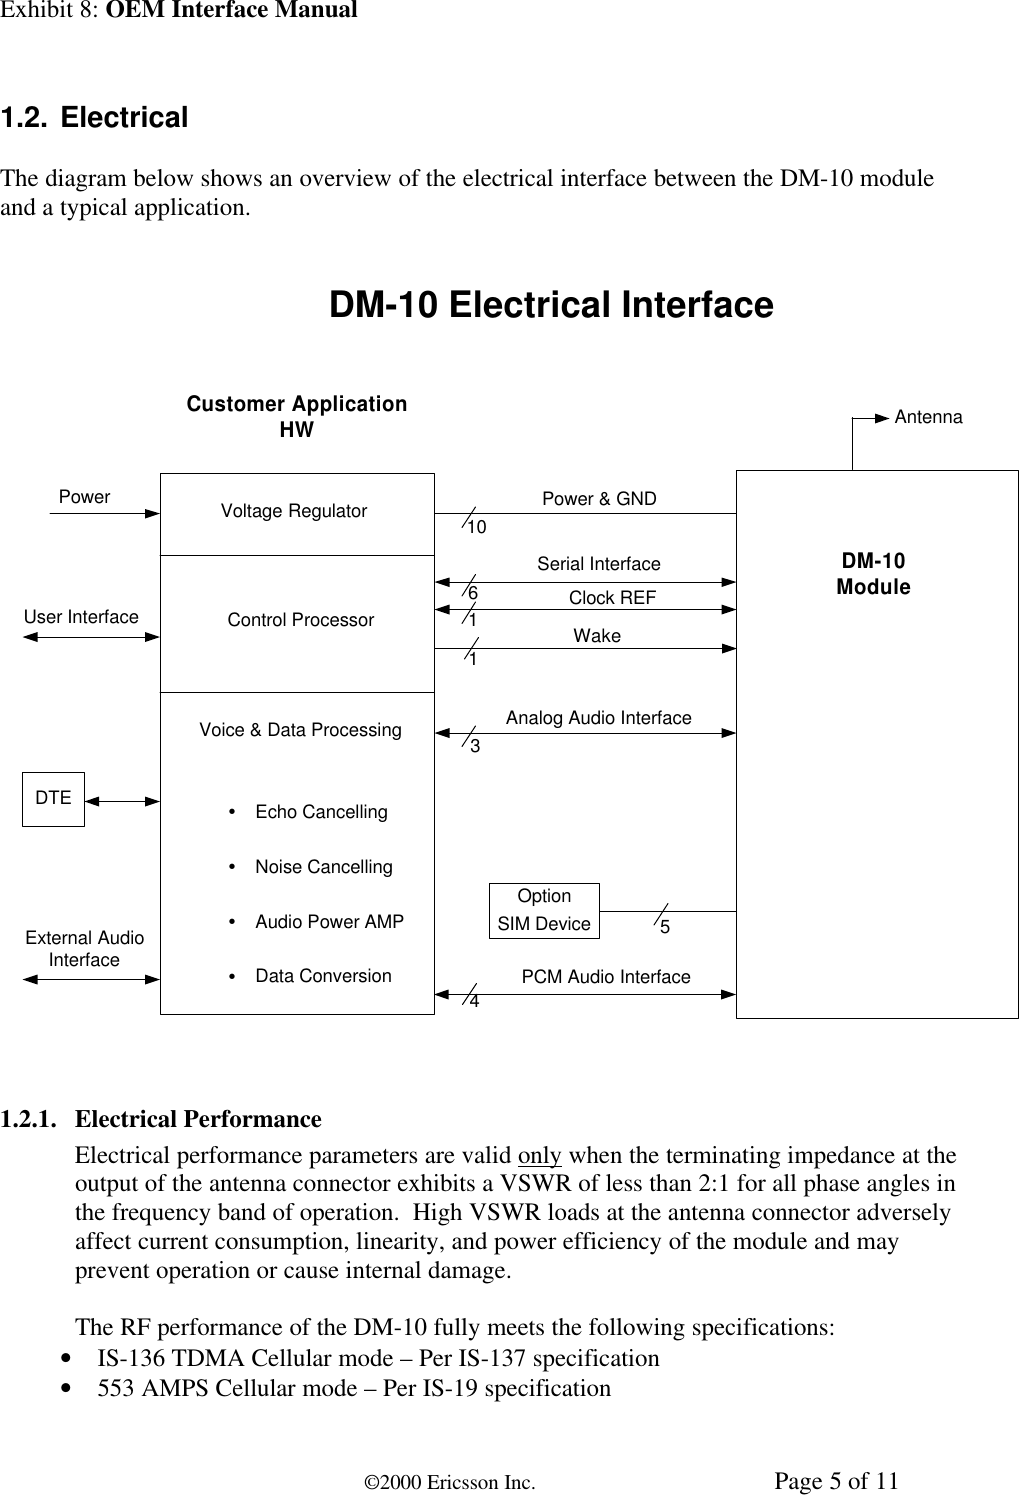 Exhibit 8: OEM Interface Manual©2000 Ericsson Inc. Page 5 of 111.2. ElectricalThe diagram below shows an overview of the electrical interface between the DM-10 moduleand a typical application.DM-10 Electrical InterfaceCustomer ApplicationHWVoltage RegulatorControl ProcessorVoice &amp; Data ProcessingŸEcho CancellingŸNoise CancellingŸAudio Power AMPŸData ConversionDTEPowerExternal AudioInterfaceAntennaUser Interface61Power &amp; GNDSerial InterfaceWakeAnalog Audio Interface101354Clock REFOptionSIM DeviceDM-10ModulePCM Audio Interface1.2.1. Electrical PerformanceElectrical performance parameters are valid only when the terminating impedance at theoutput of the antenna connector exhibits a VSWR of less than 2:1 for all phase angles inthe frequency band of operation.  High VSWR loads at the antenna connector adverselyaffect current consumption, linearity, and power efficiency of the module and mayprevent operation or cause internal damage.The RF performance of the DM-10 fully meets the following specifications:• IS-136 TDMA Cellular mode – Per IS-137 specification• 553 AMPS Cellular mode – Per IS-19 specification